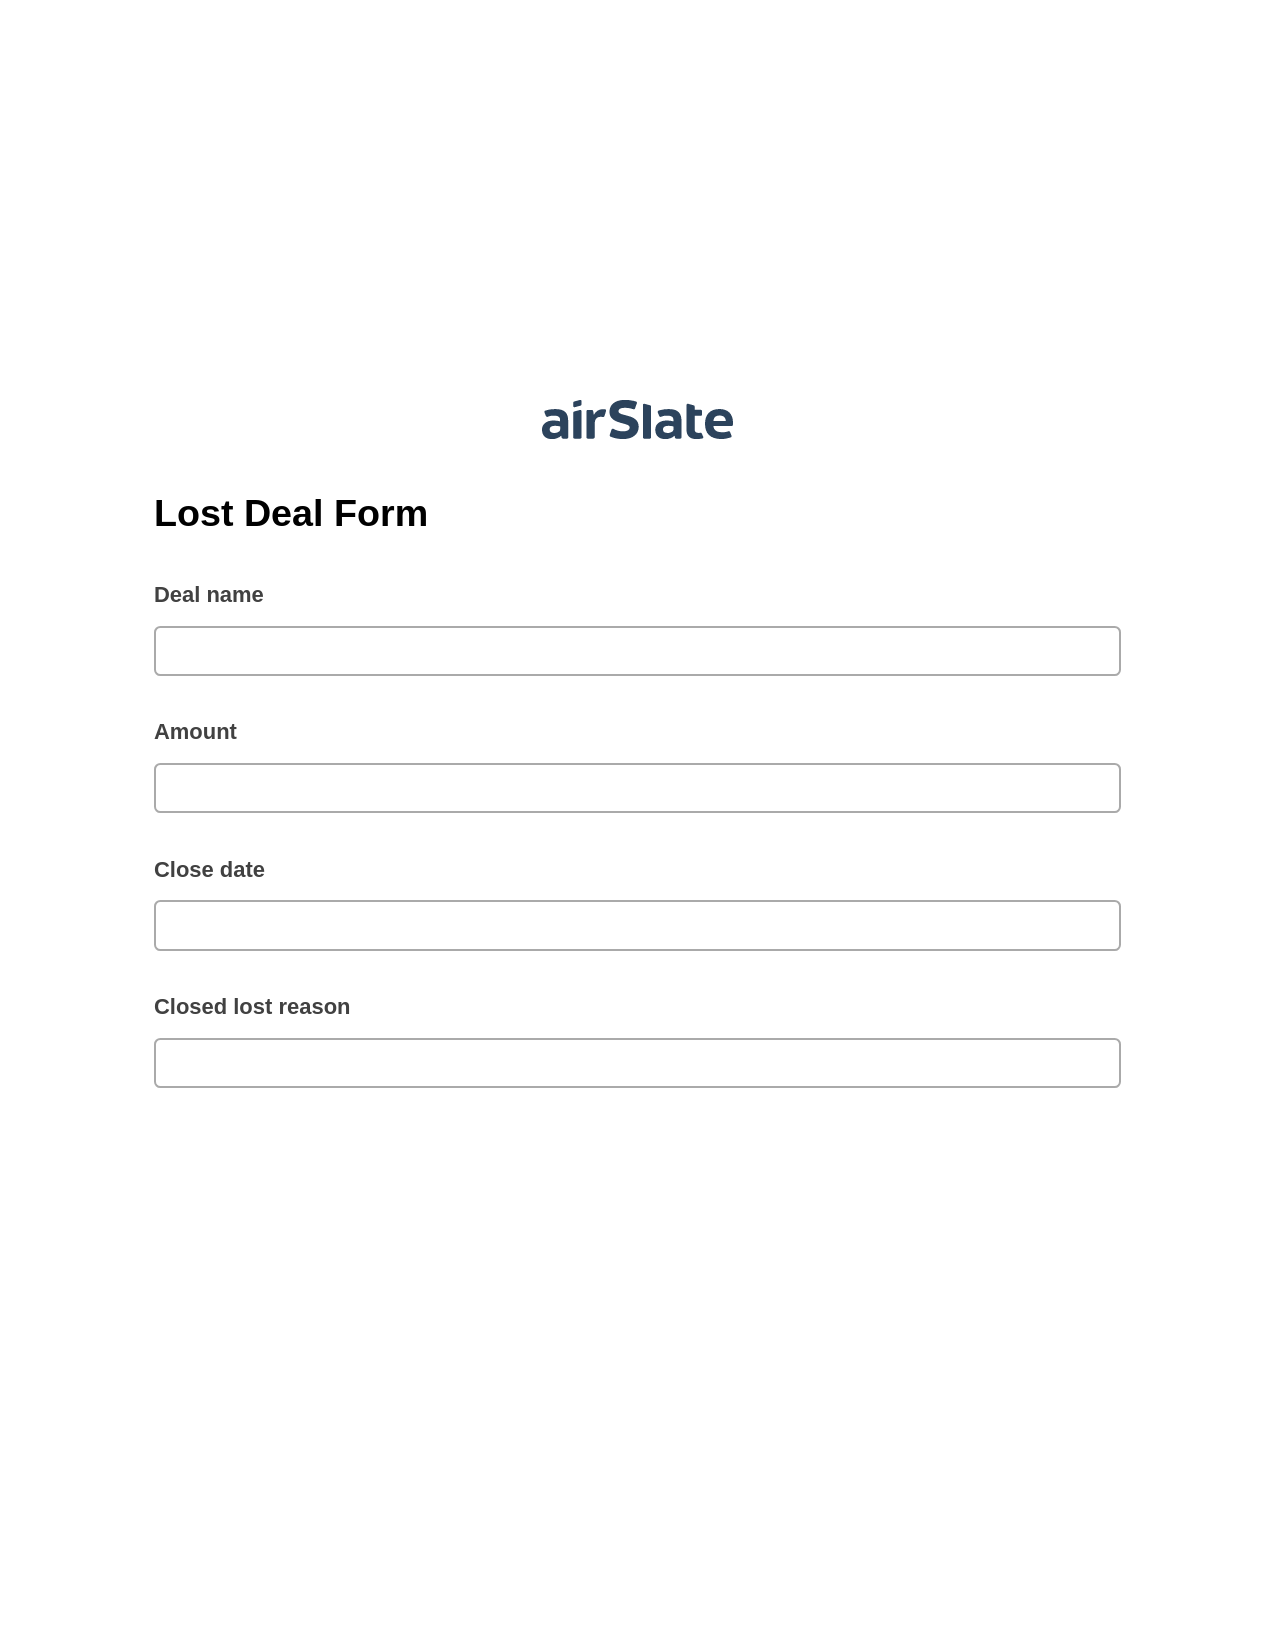 Lost Deal Form Pre-fill from CSV File Bot, Send Mailchimp Campaign Bot, Archive to Dropbox Bot